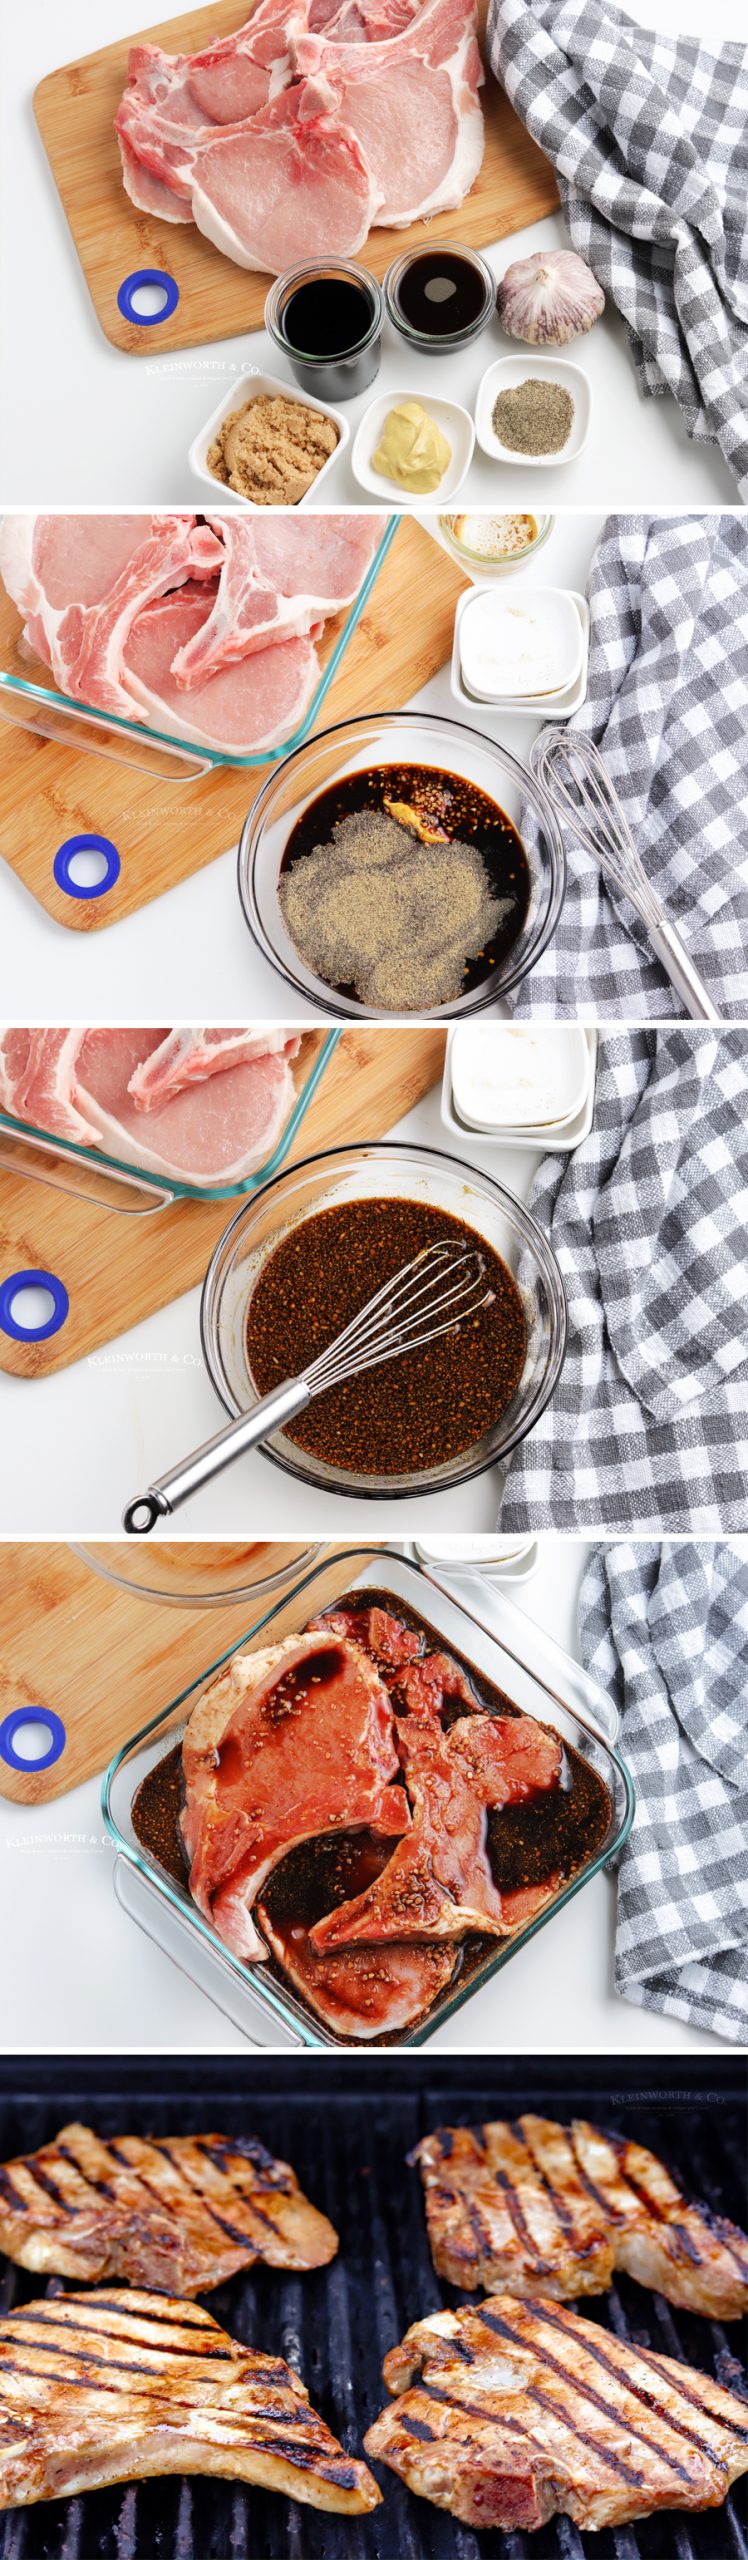 how to make Grilled Pork Chops